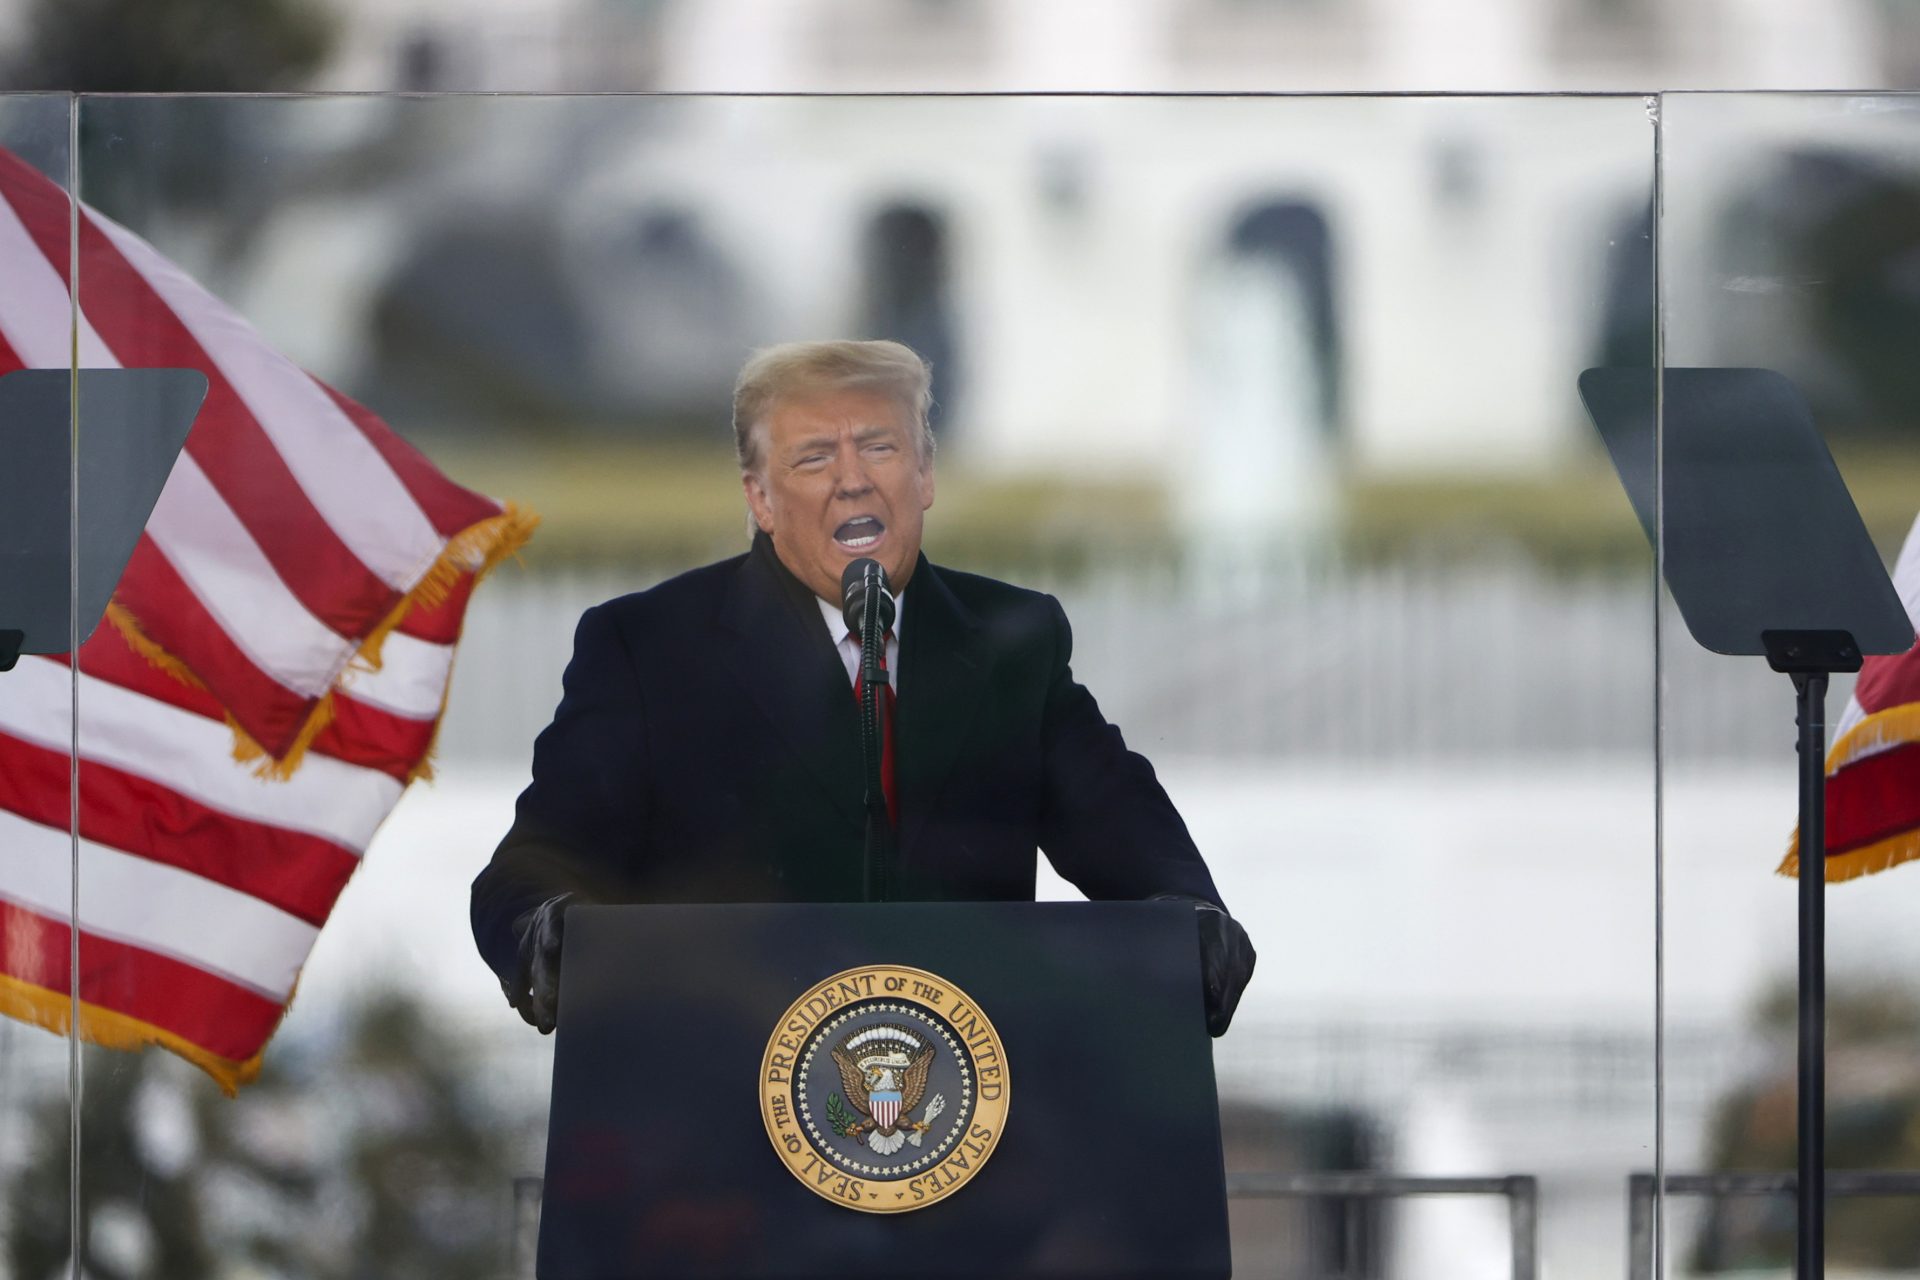 President Donald Trump speaks at the "Stop The Steal" Rally on January 06, 2021 in Washington, DC. Trump supporters gathered in the nation's capital today to protest the ratification of President-elect Joe Biden's Electoral College victory over President Trump in the 2020 election.